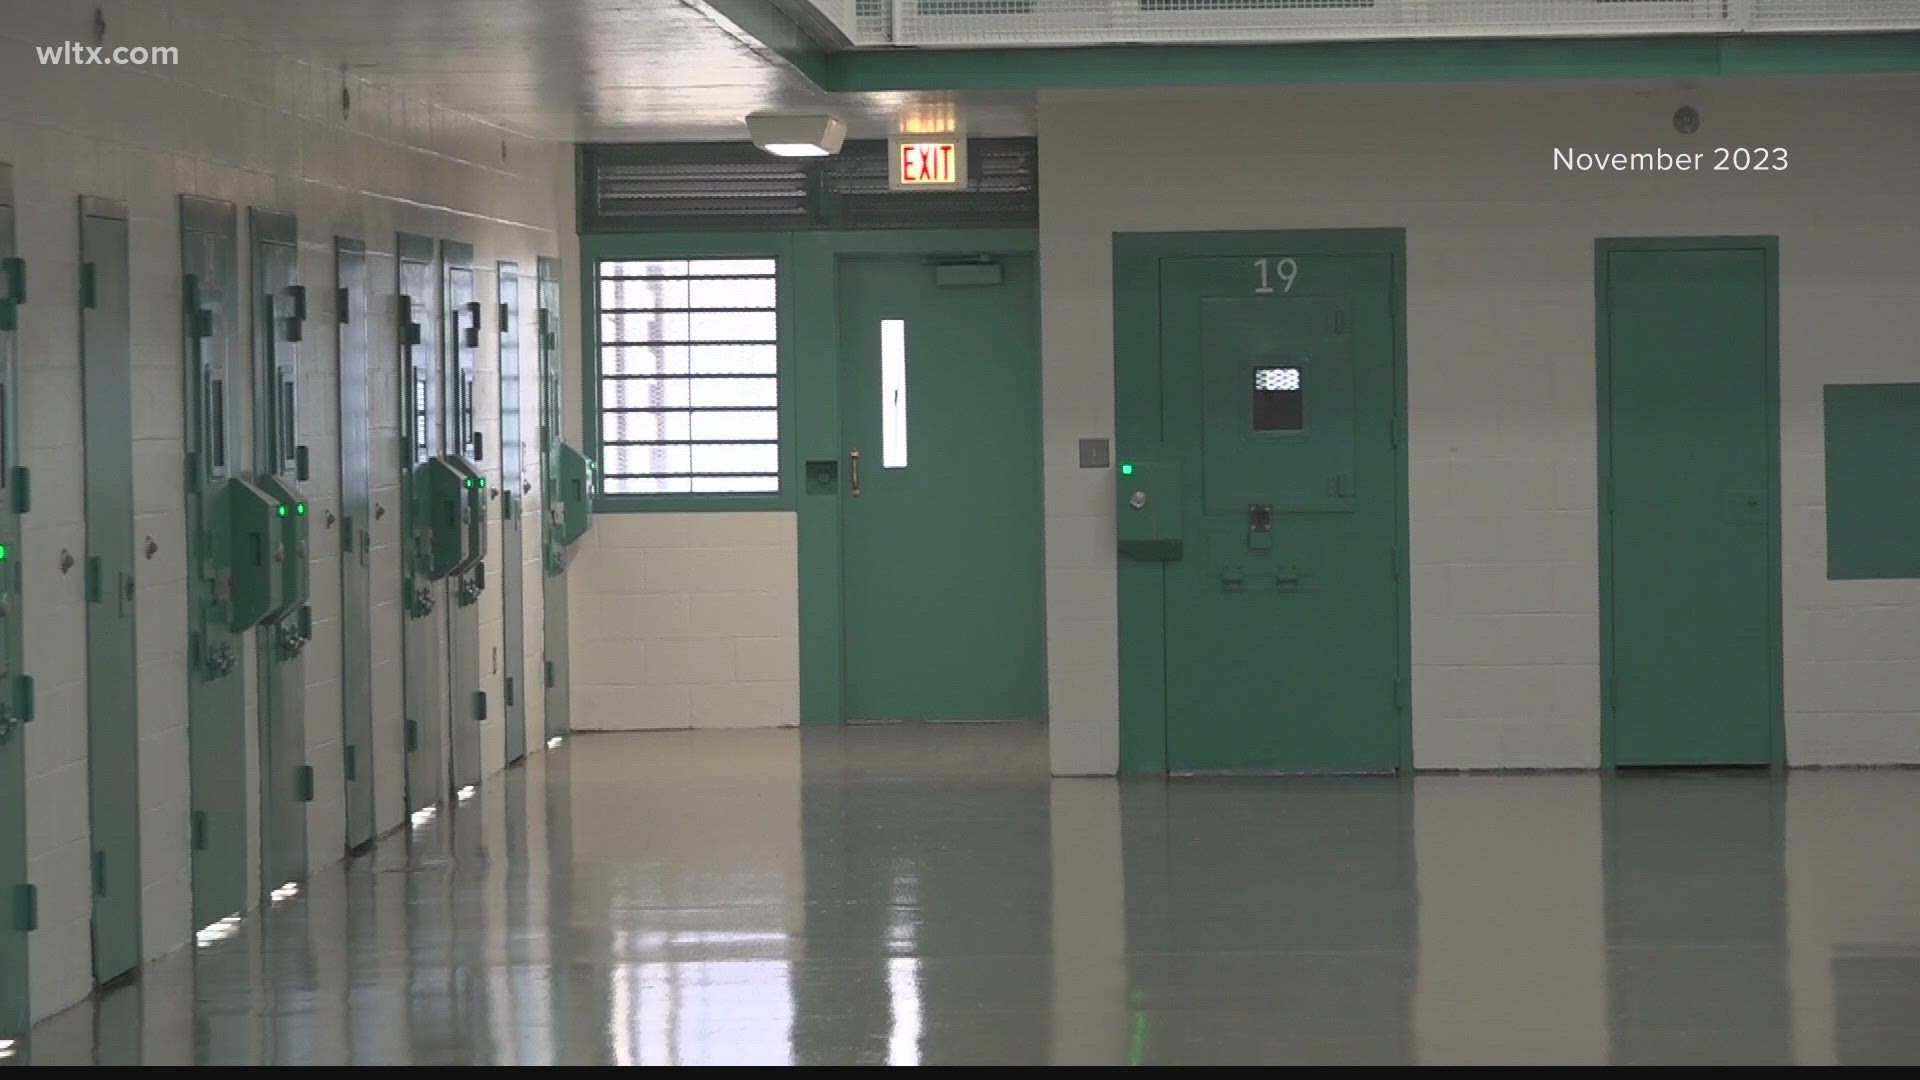 In about two weeks Richland County leaders are required to submit a plan for improvements at the county jail, Alvin S. Glenn.